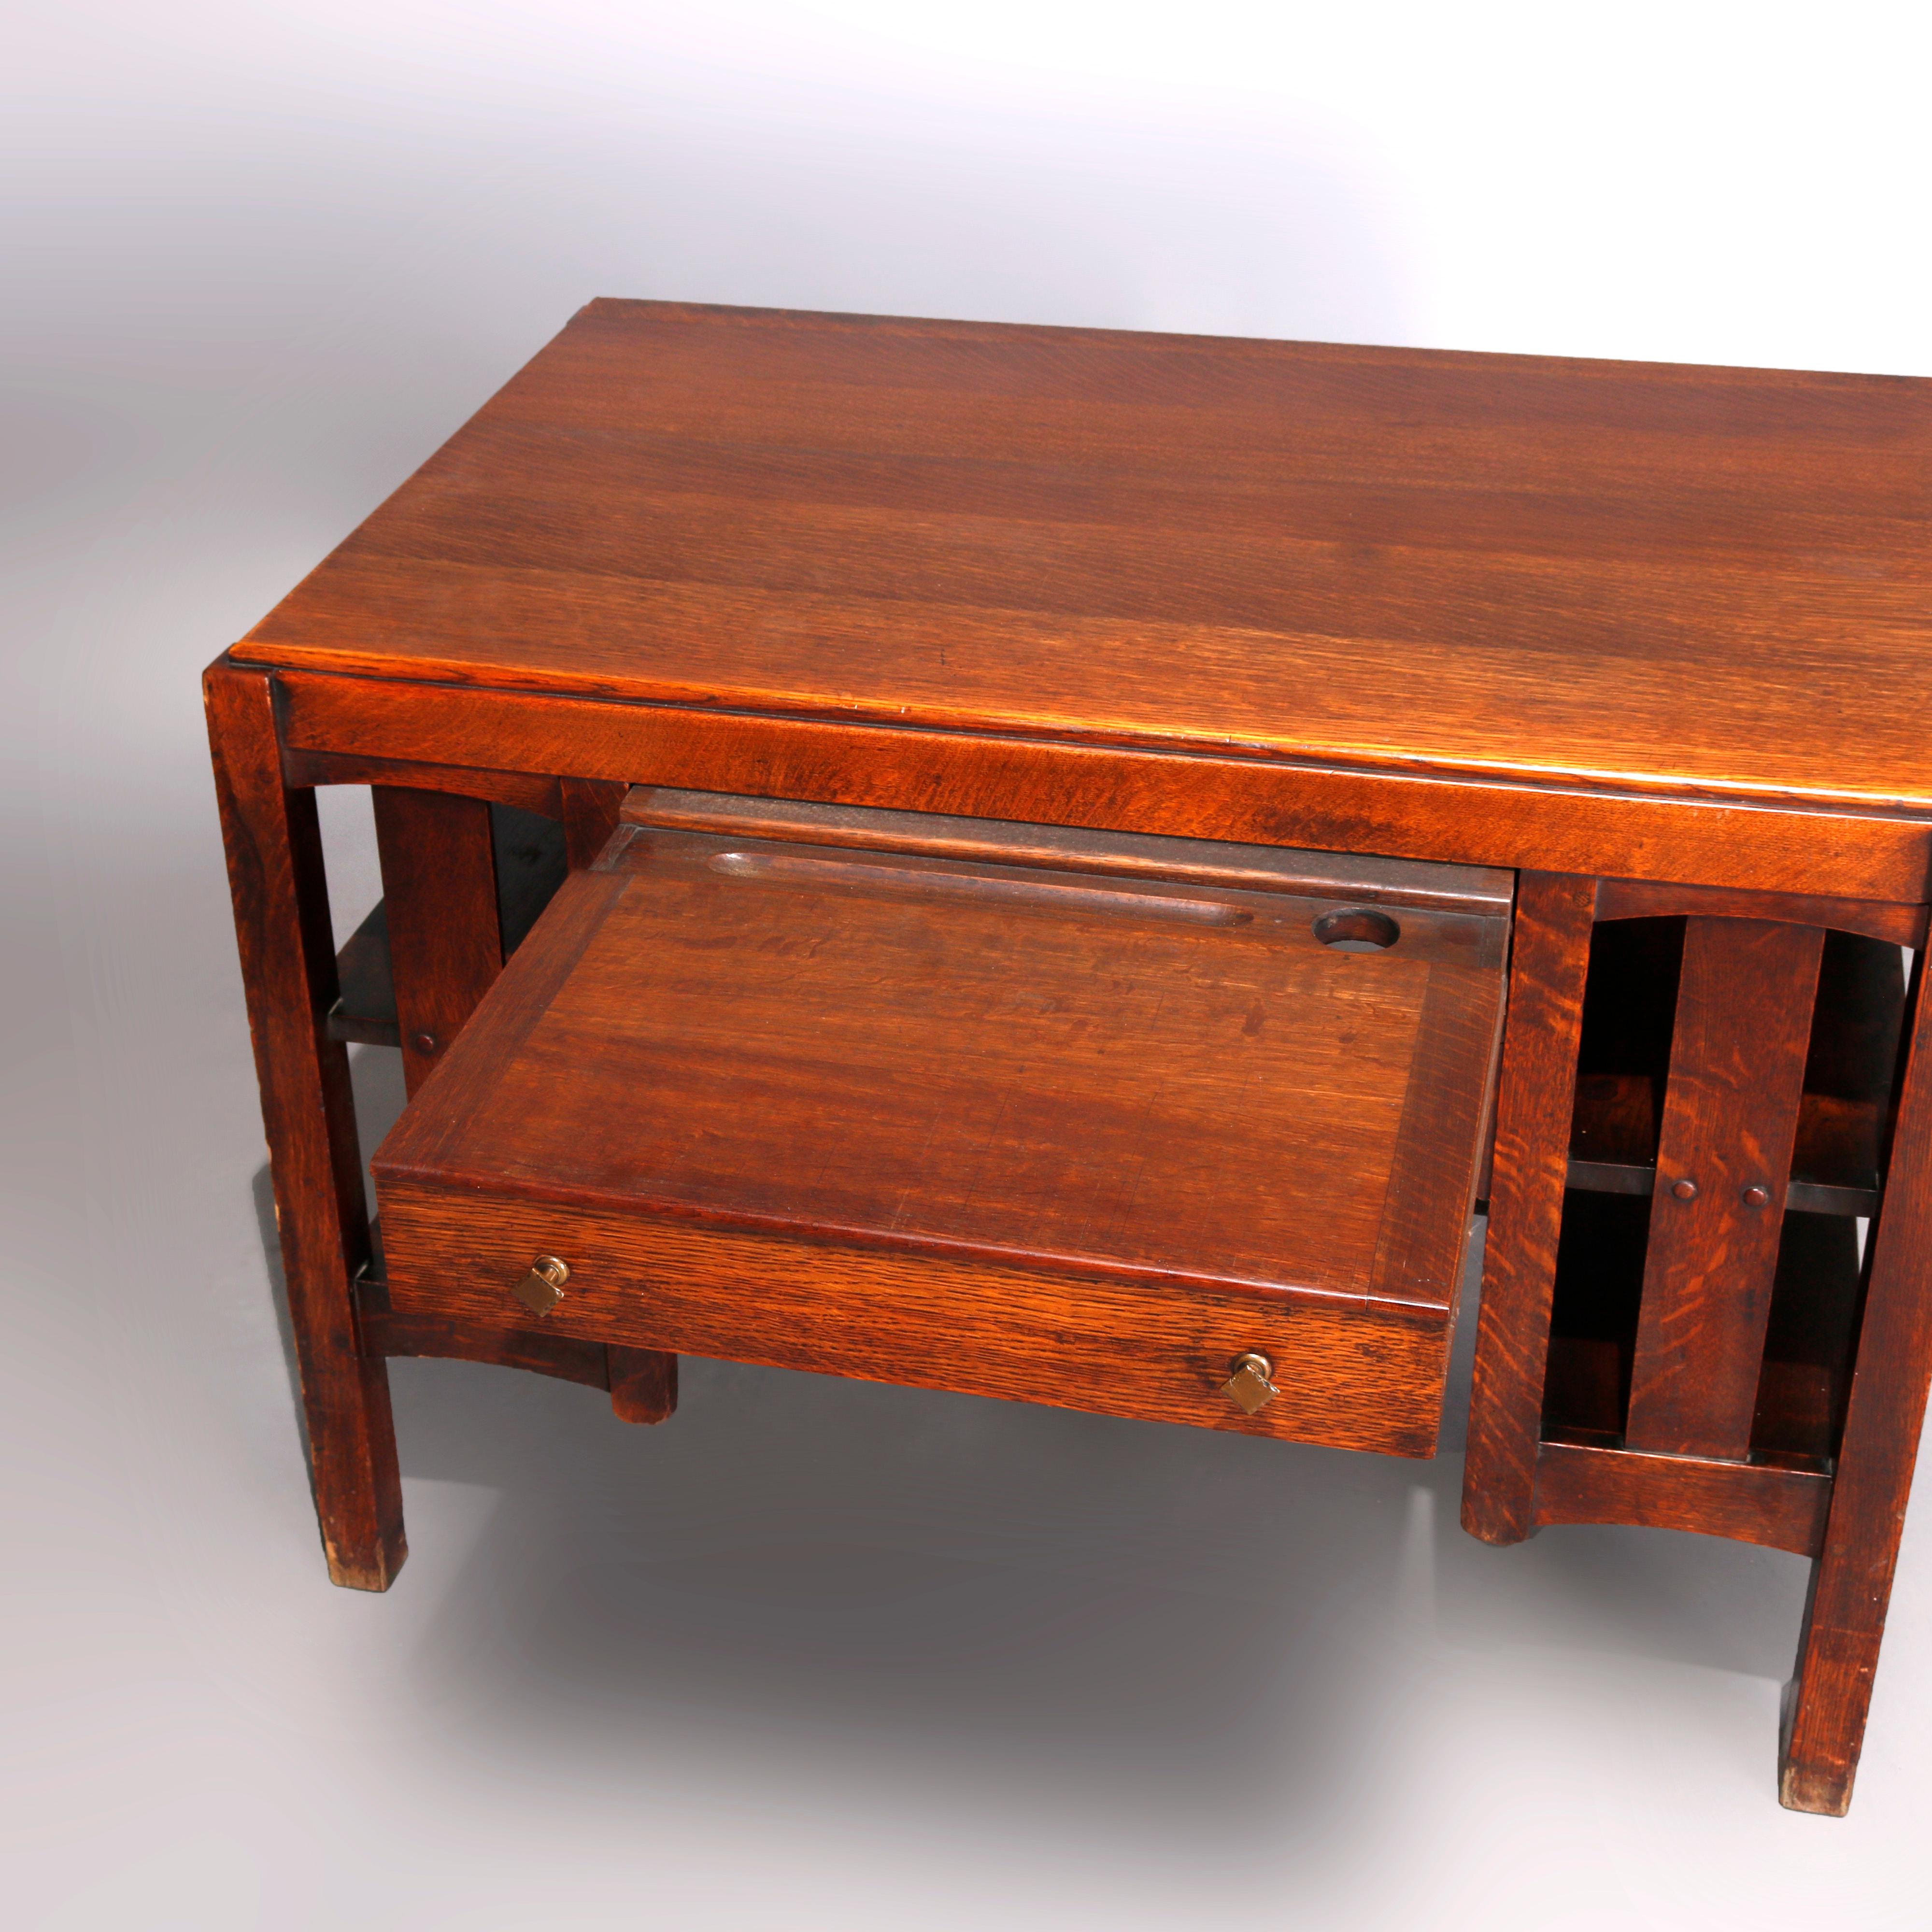 Antique Arts & Crafts Mission Oak Desk, Library Table, by Limbert, circa 1910 4